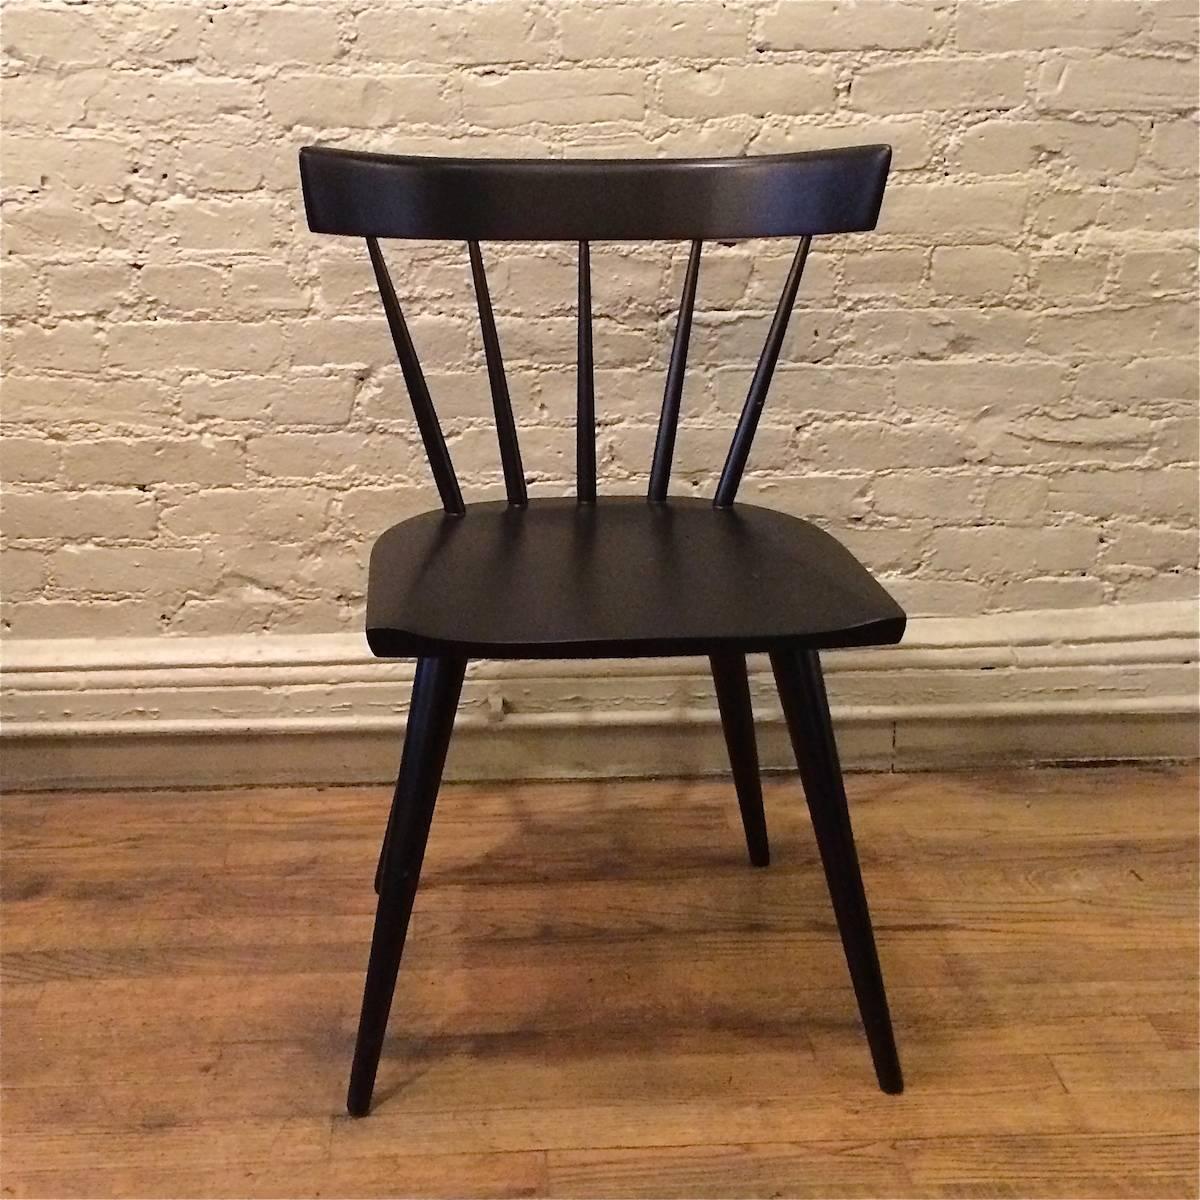 Mid-century modern, Windsor style, spindle back, maple chair by Paul McCobb for Planner Group, Winchendon shown in a matte black lacquer finish. 1 black lacquered chair and 4 unfinished chairs are available that can be finished to your specs. Please